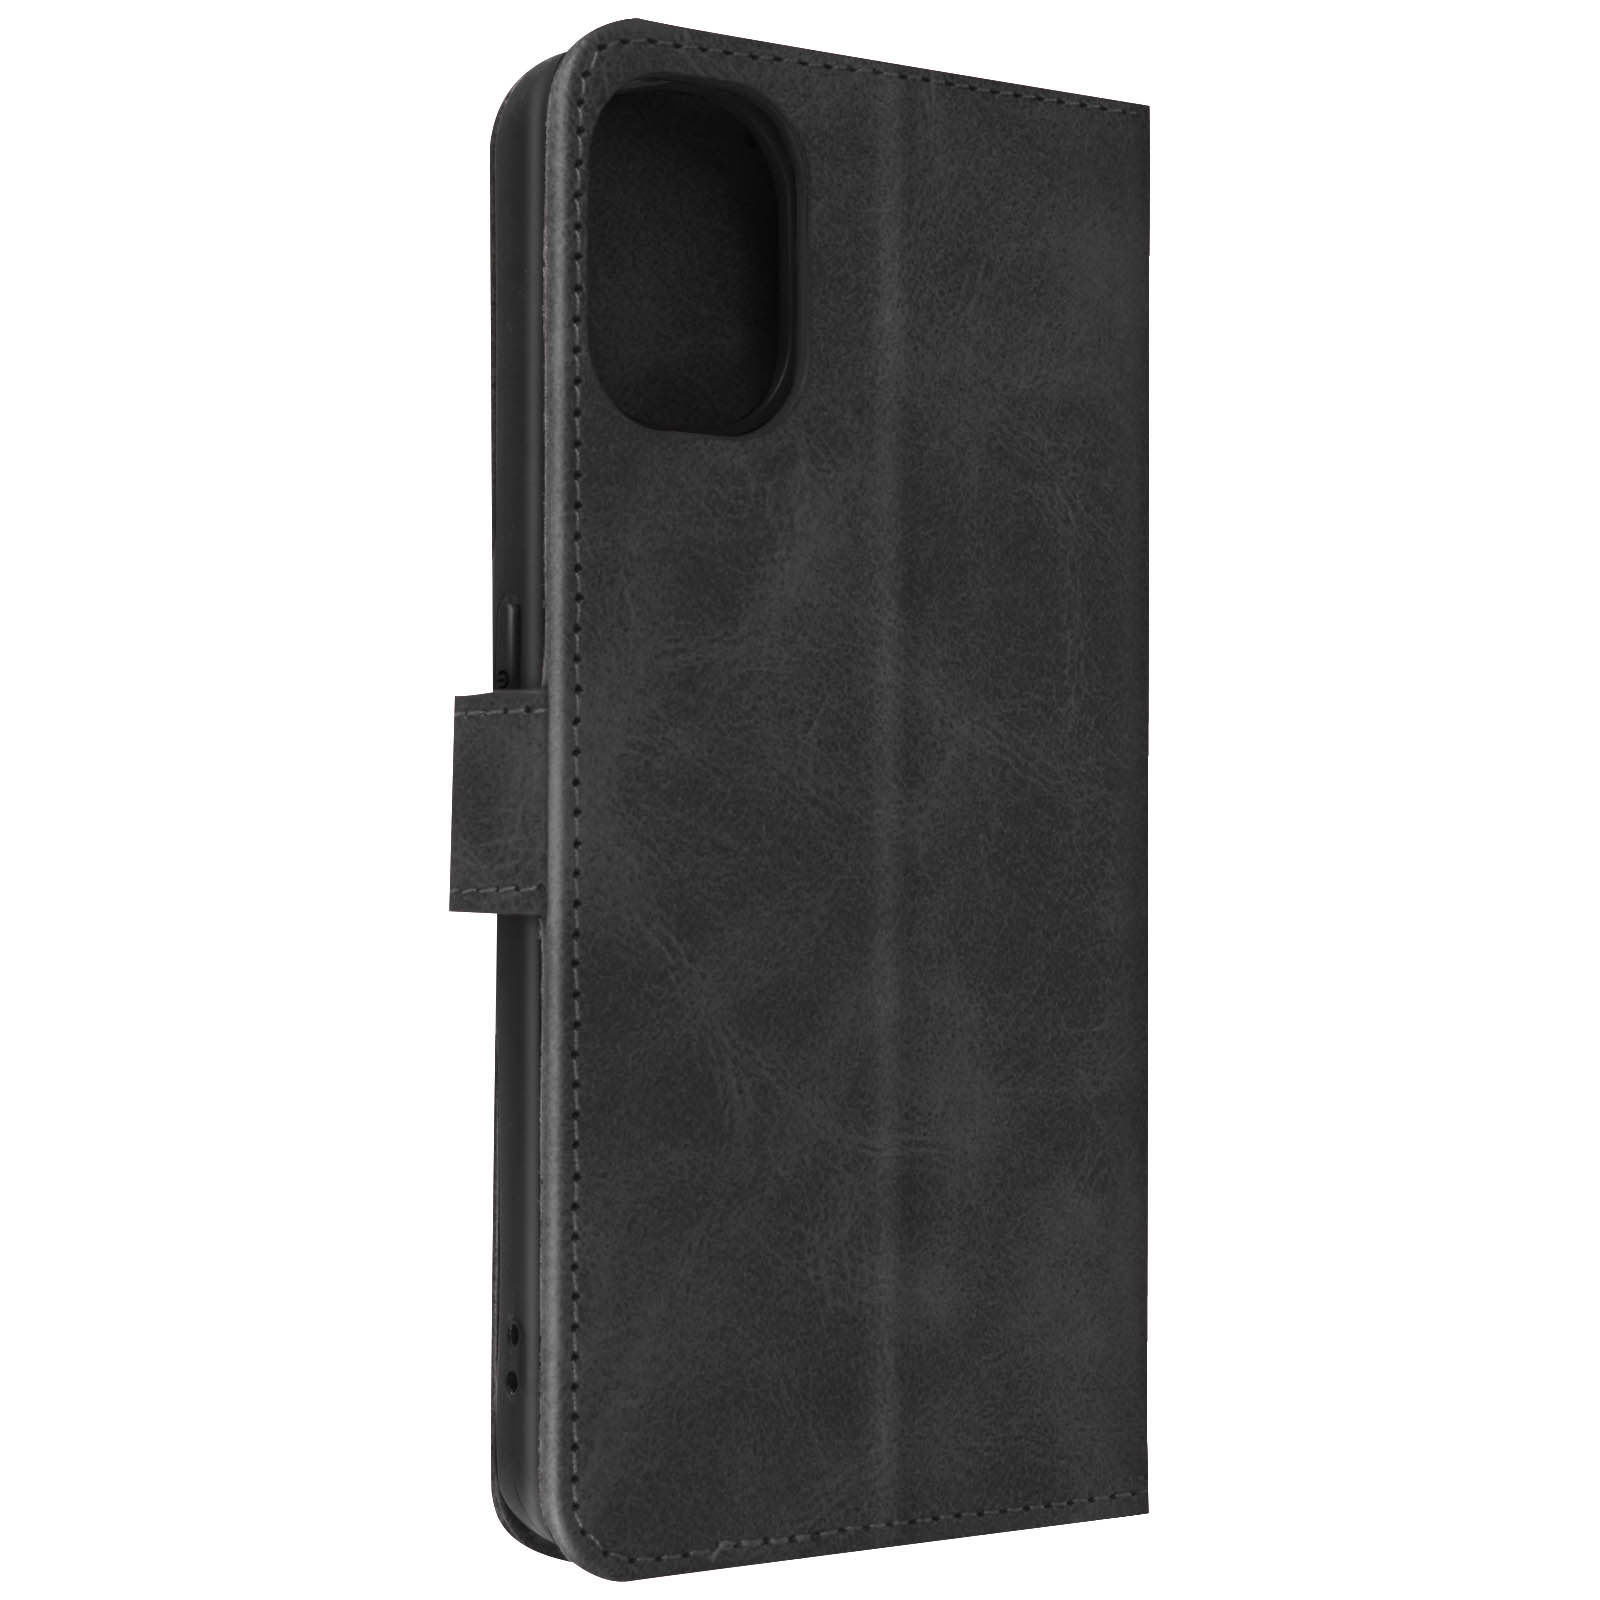 AVIZAR Bookstyle Series, Phone 1, Bookcover, Schwarz Nothing